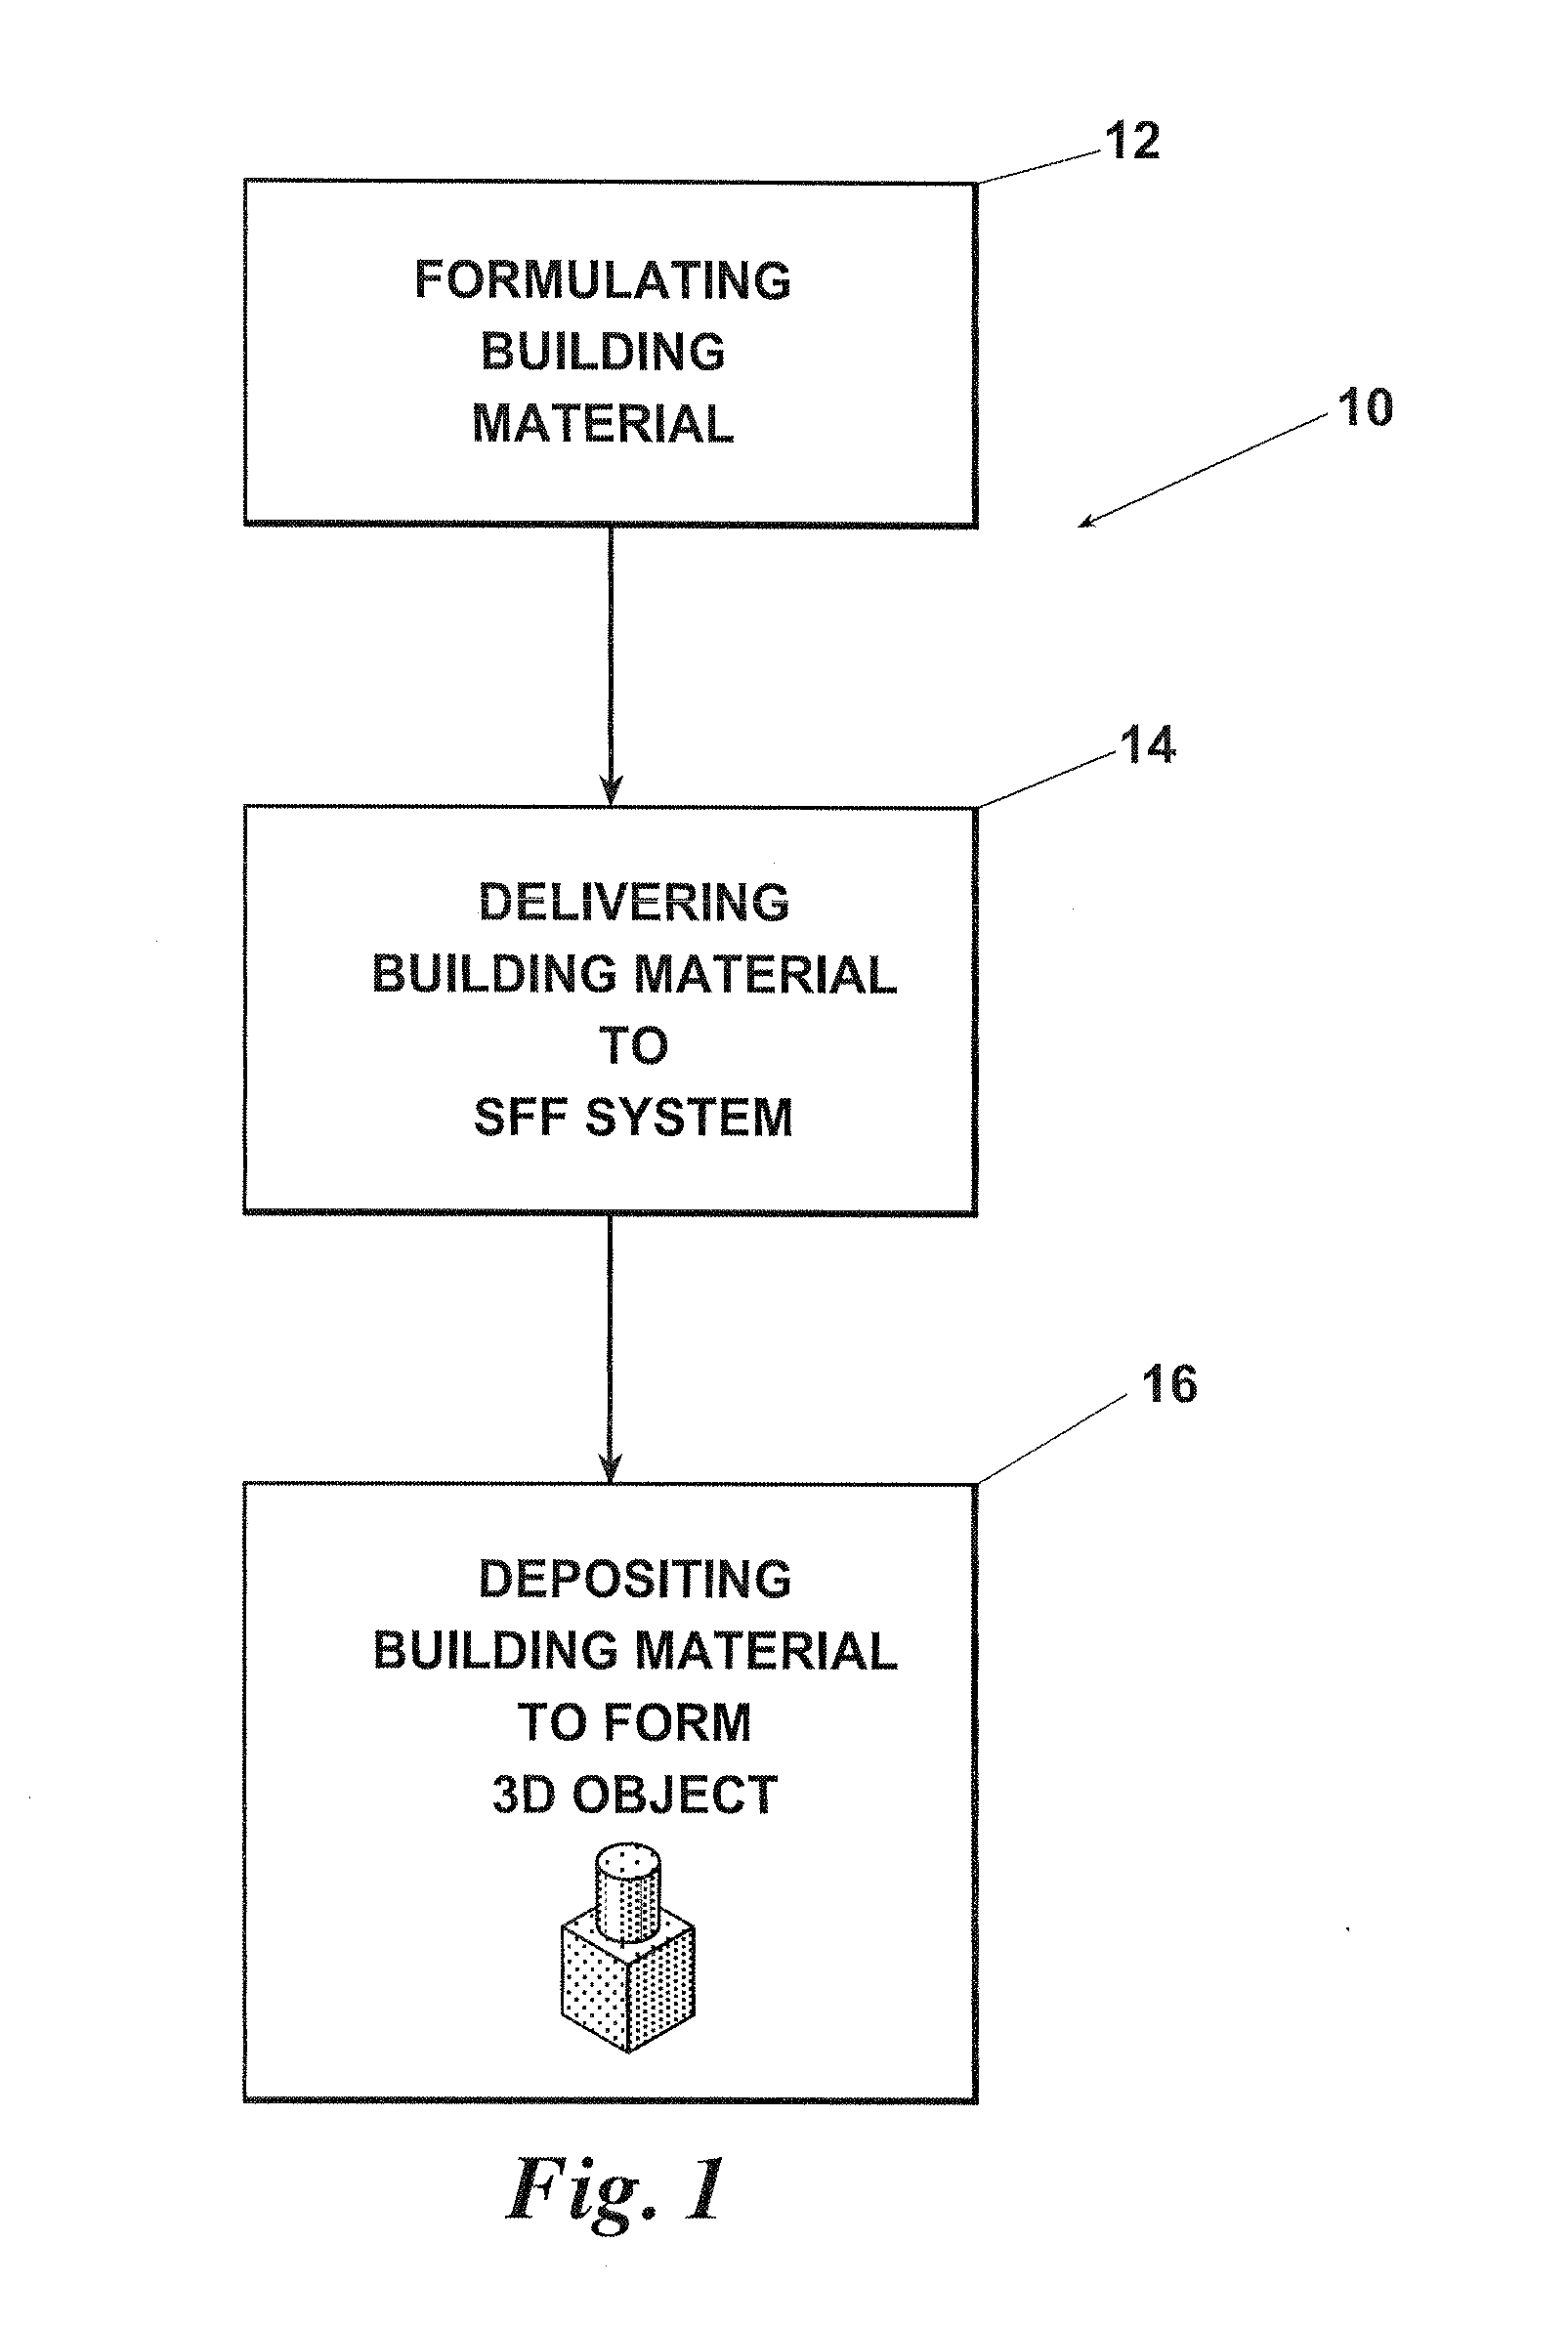 Process for Making Three Dimensional Objects From Dispersions of Polymer Colloidal Particles